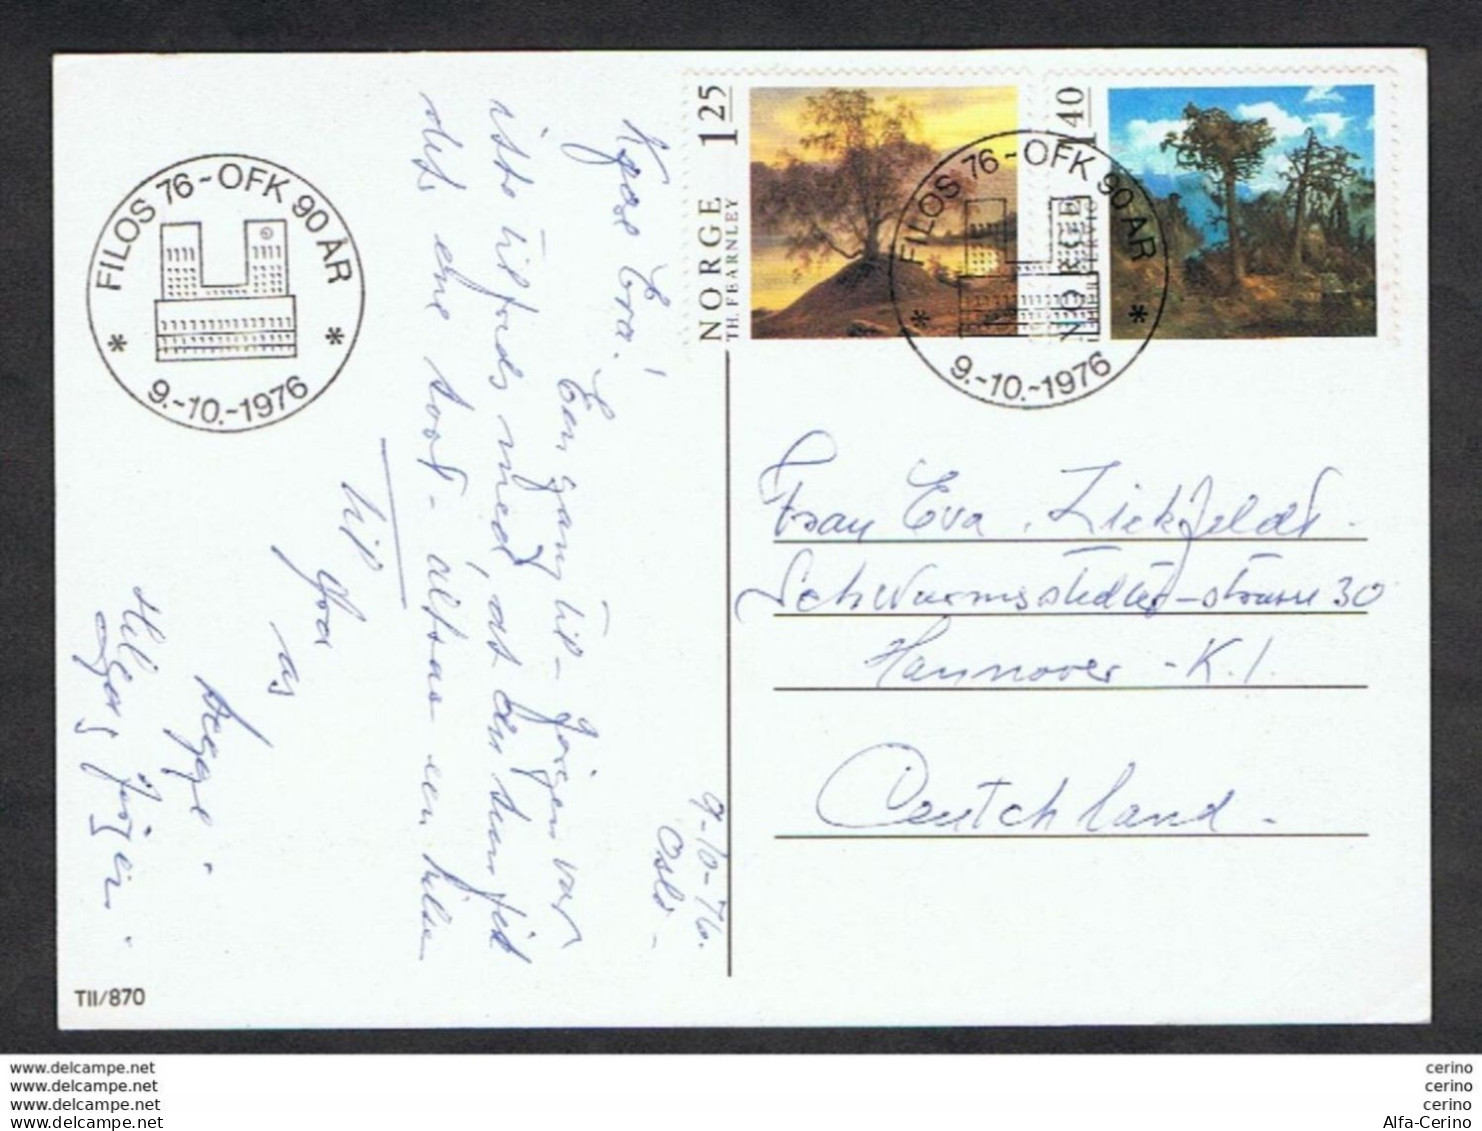 NORWAY: 9-10-1976 ILLUSTRATED POSTCARD "FILOS 76" WITH: 125 Ore + 140 Ore (688 + 689) - TO GERMANY - Lettres & Documents